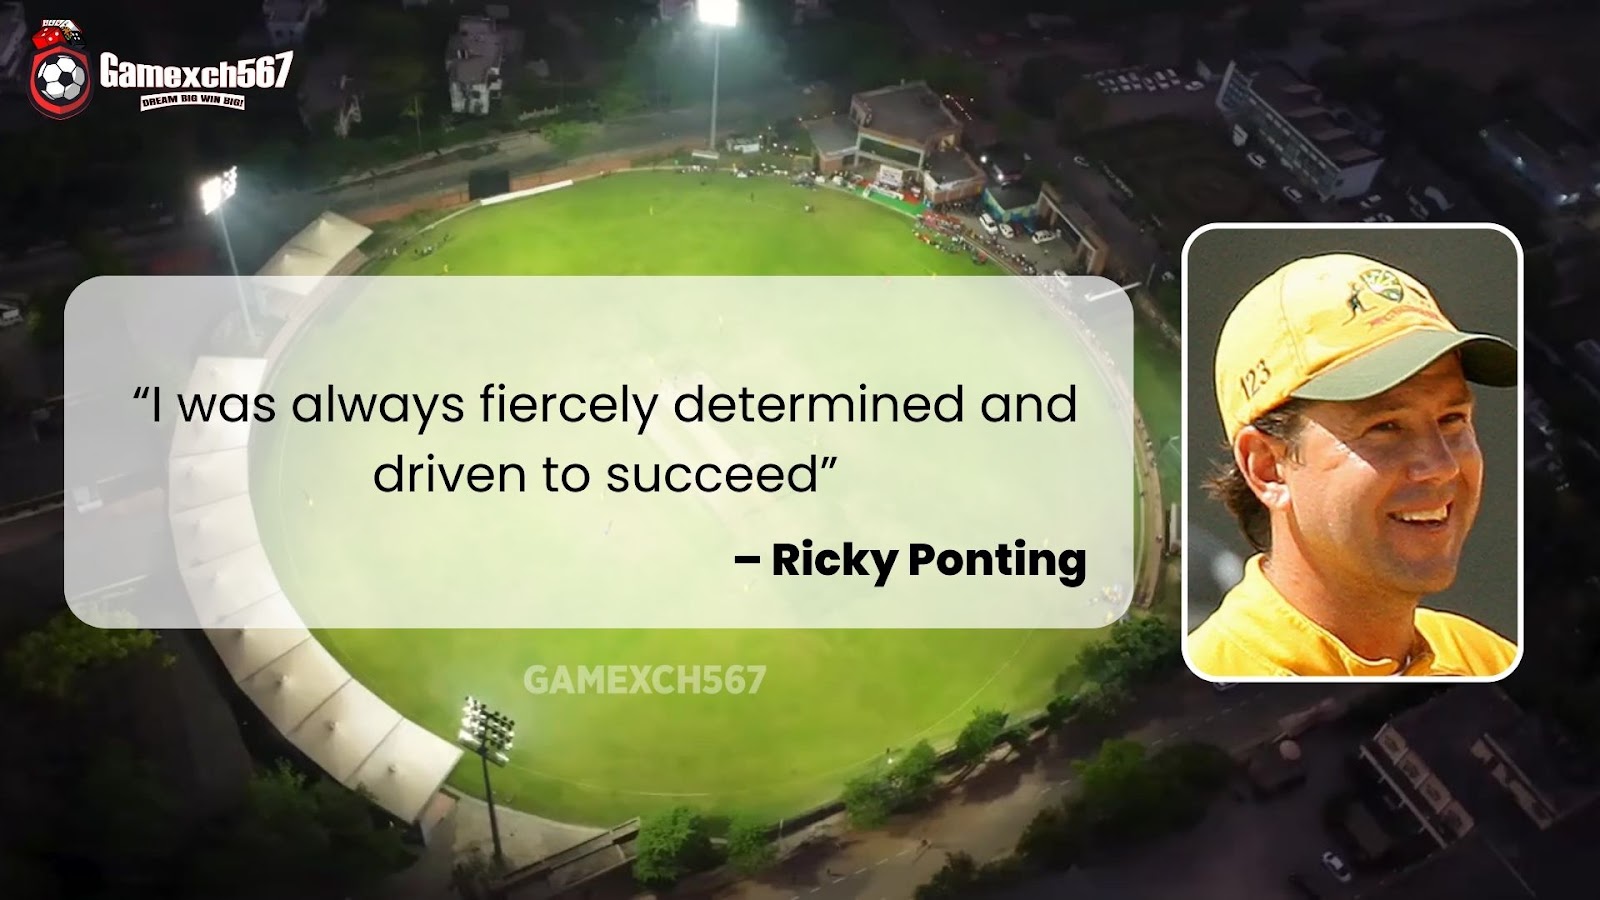 Quotes by cricketers - Ricky Ponting